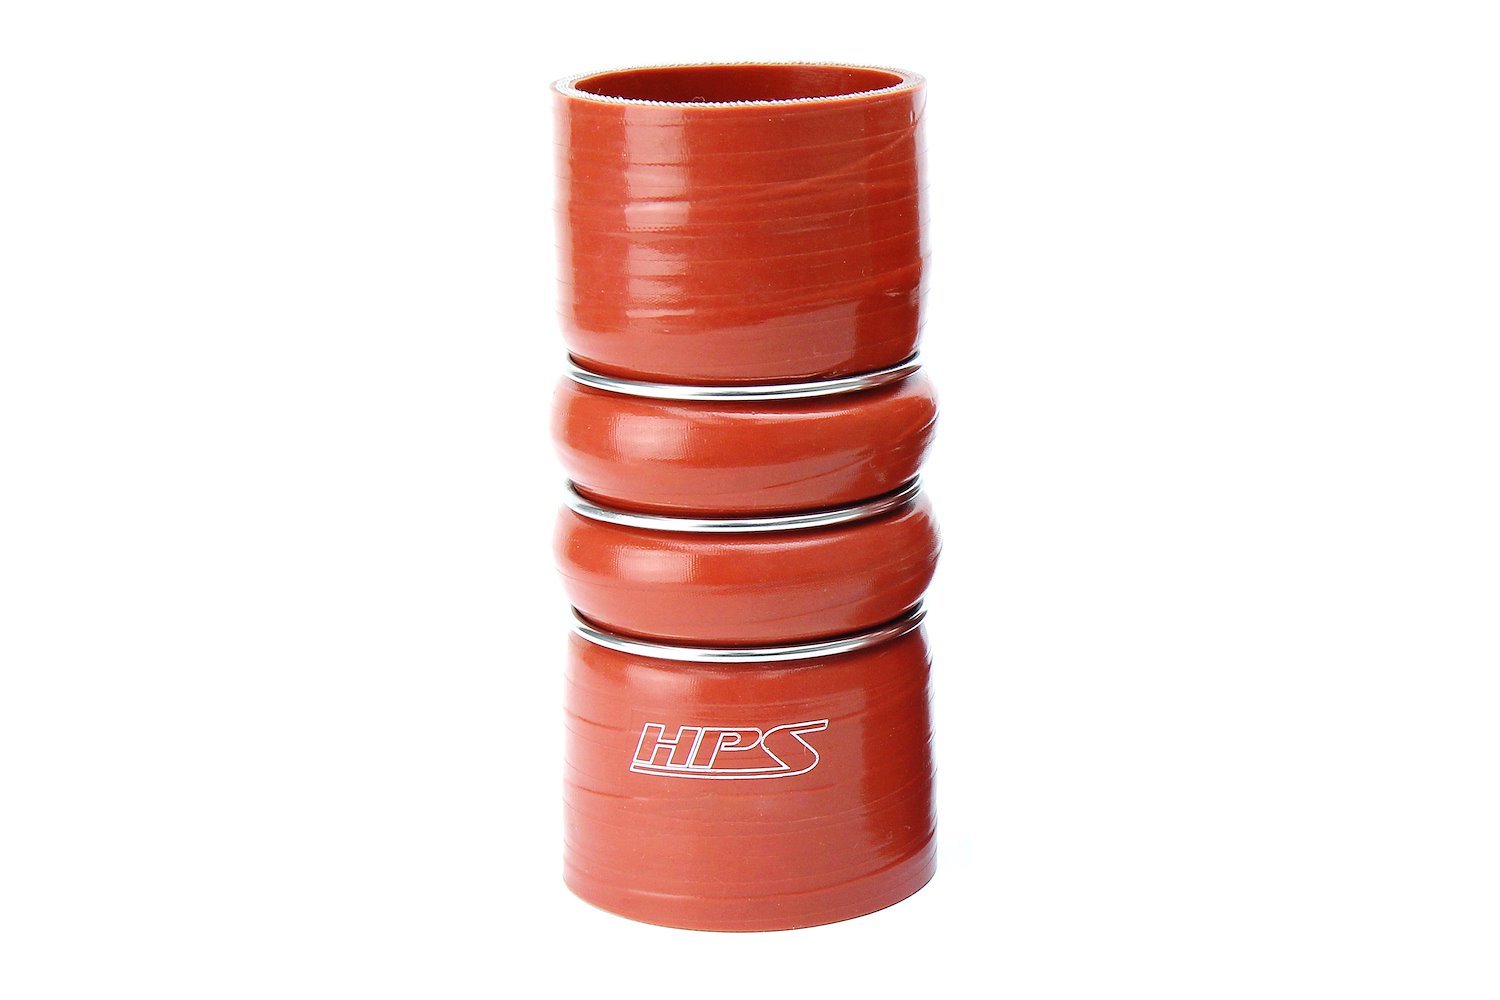 CAC-225-HOT Silicone CAC Hose, Silicone CAC Hump Hose Hot, High-Temp 4-Ply Aramid Reinforced, 2-1/4 in. ID, 6 in. Long